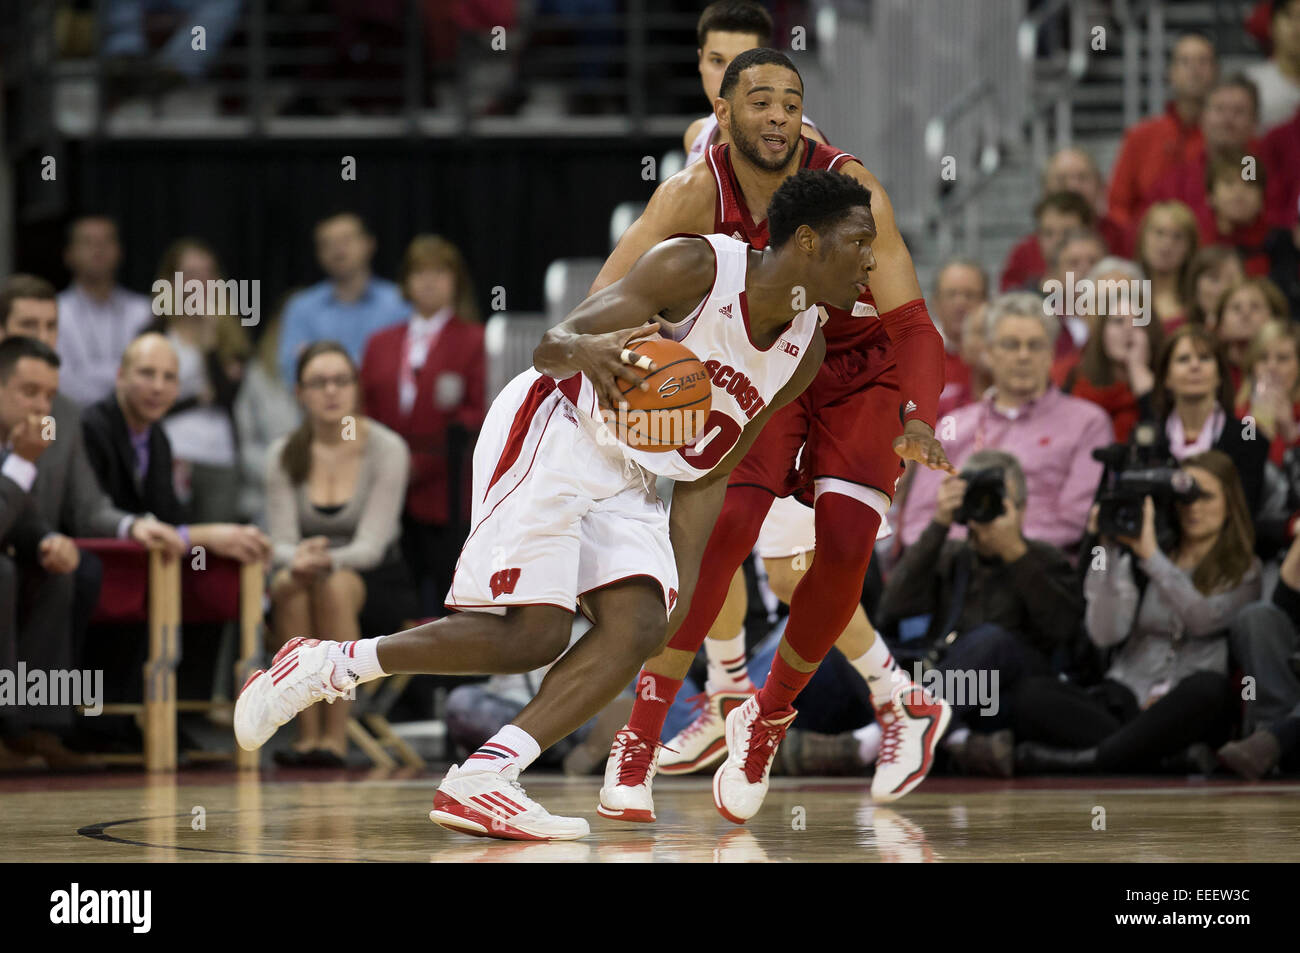 January 15, 2015: Wisconsin Badgers forward Nigel Hayes #10 drives toward the basket on Nebraska Cornhuskers forward Walter Pitchford #35 during the NCAA Basketball game between the Wisconsin Badgers and Nebraska Cornhuskers at the Kohl Center in Madison, WI. Wisconsin defeated Nebraska 70-55. John Fisher/CSM Stock Photo